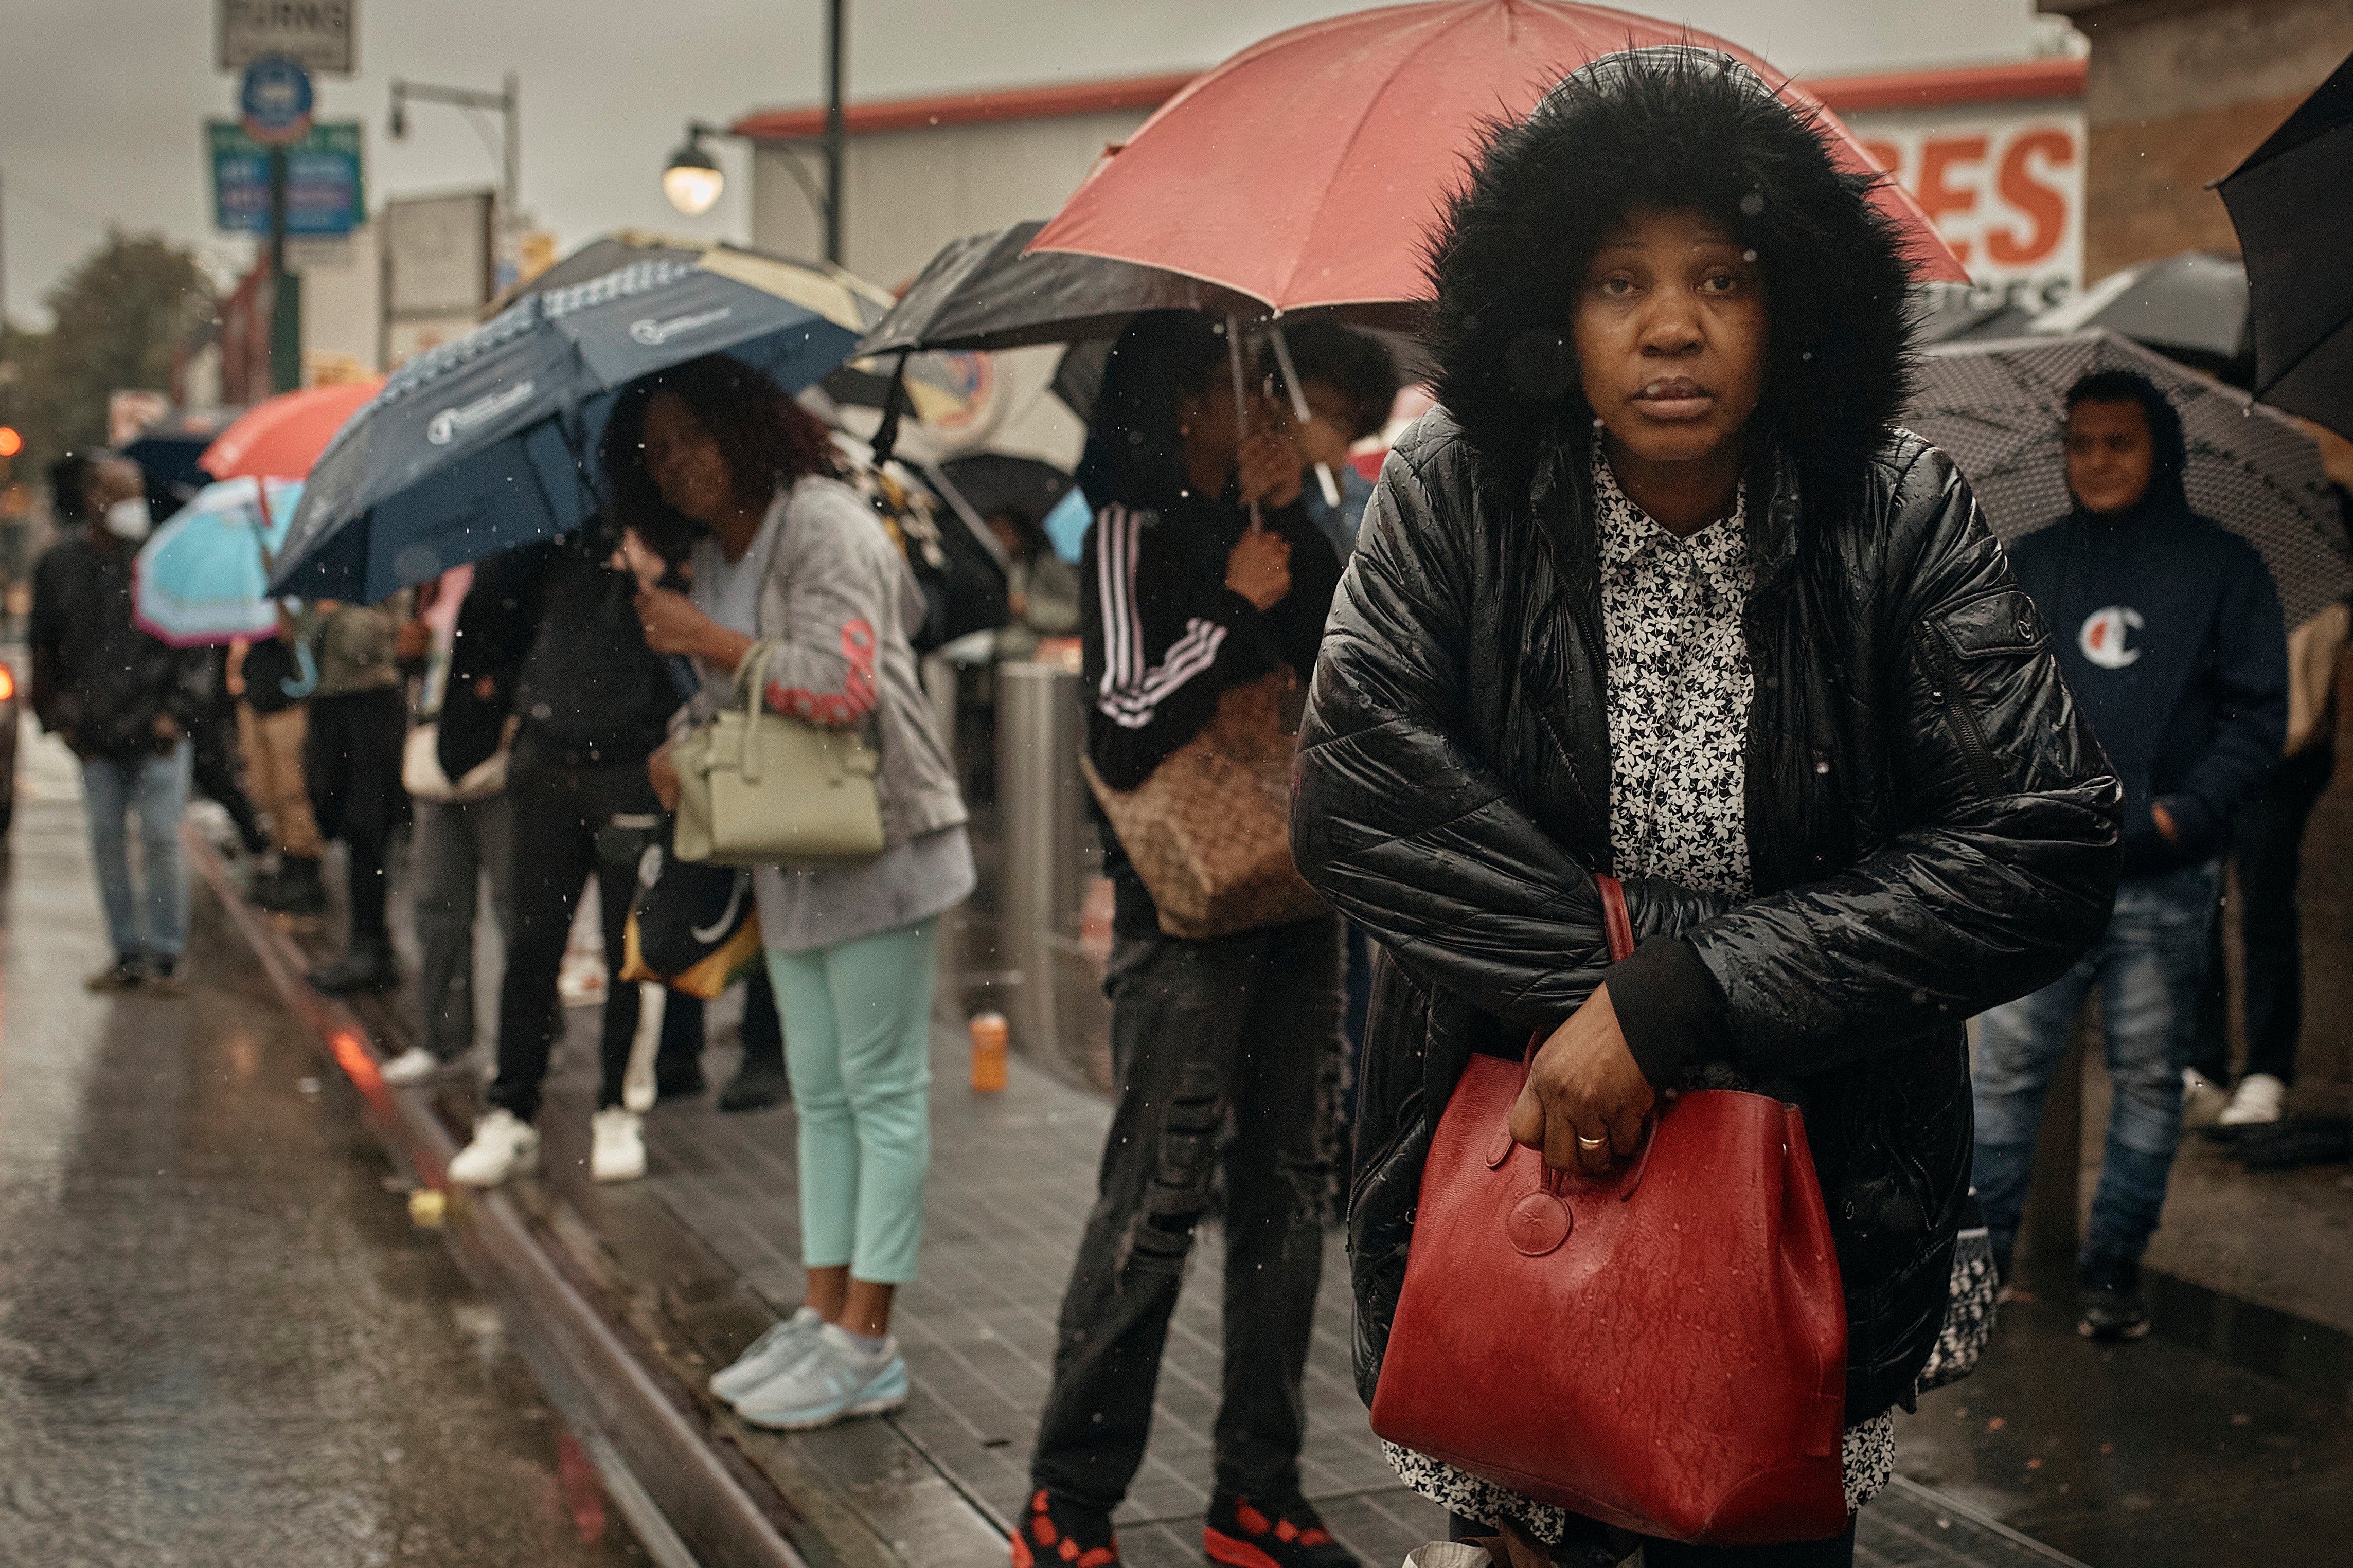 People wait for the bus as trains were cancelled last Friday across large parts of New York following a severe storm